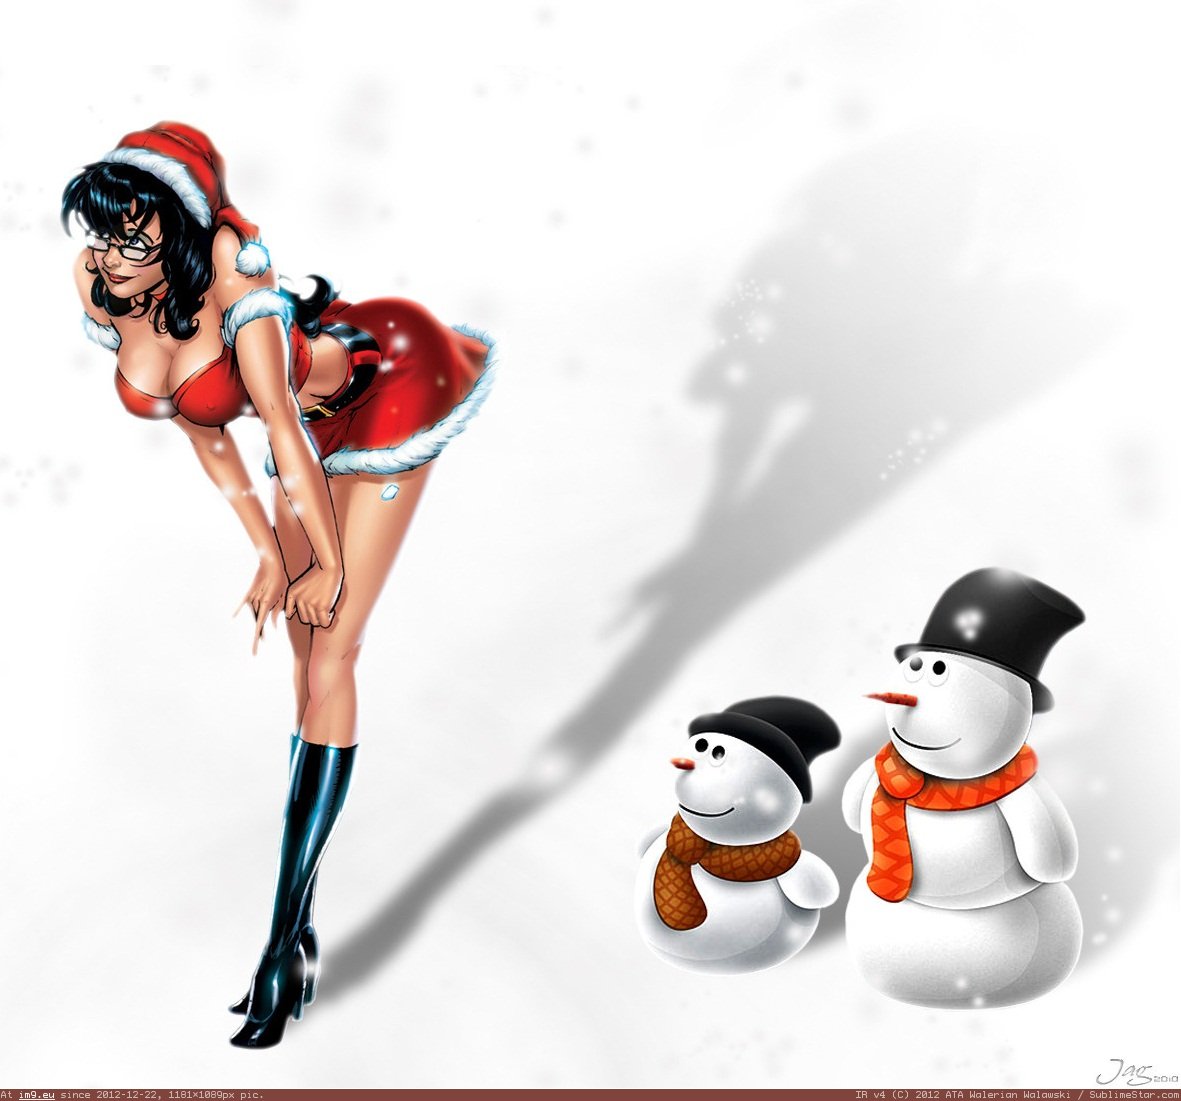 Goodwp.Com 17621 (hot xmas girl) (in Santa Sexy Helpers (Non-Nude girls photos and wallpapers))